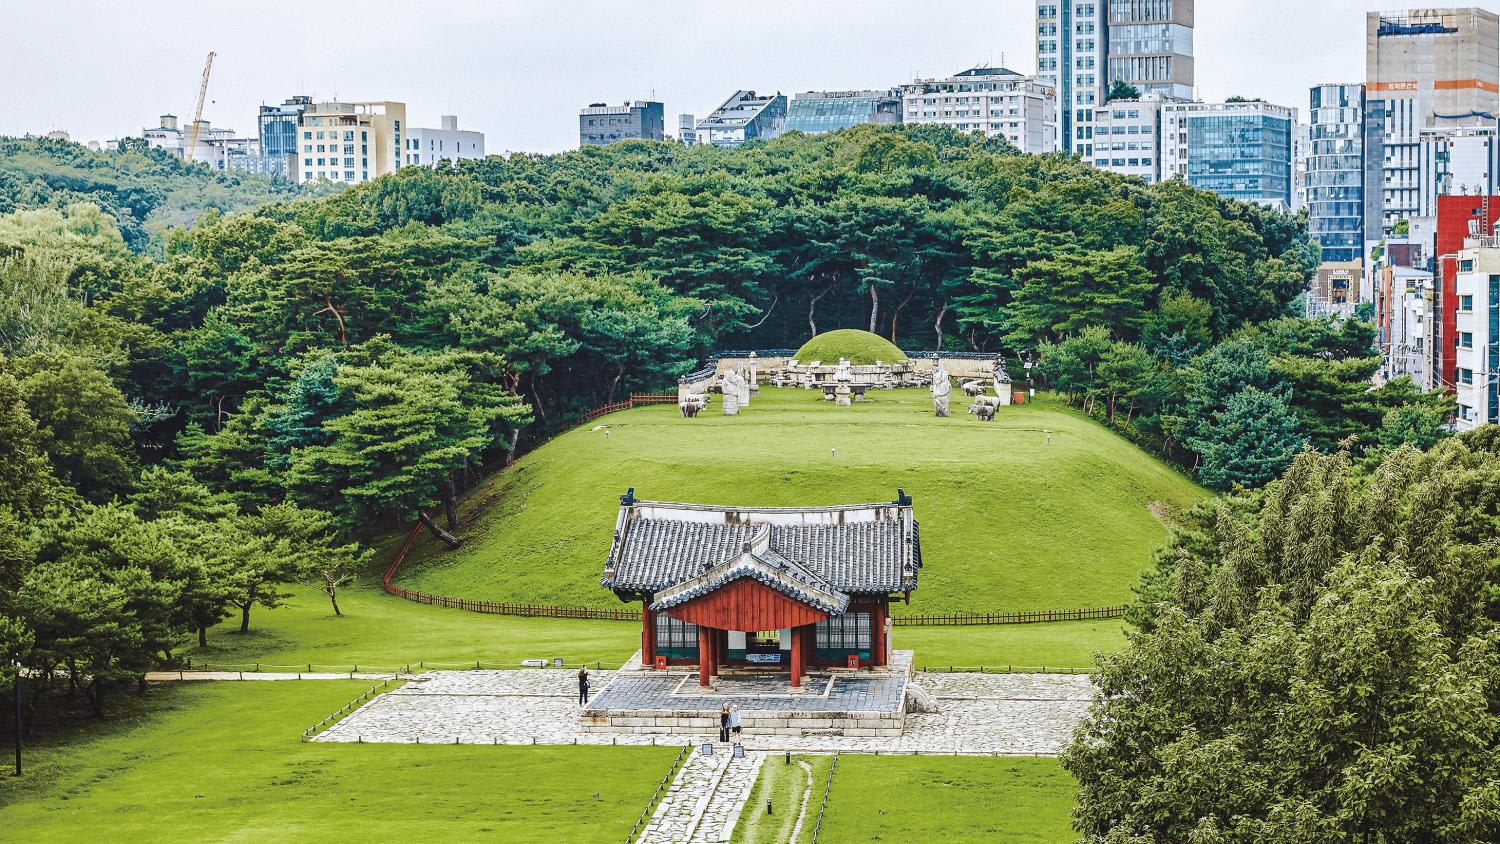 From tombs to taekwondo, discover South Korea’s past in Gangnam